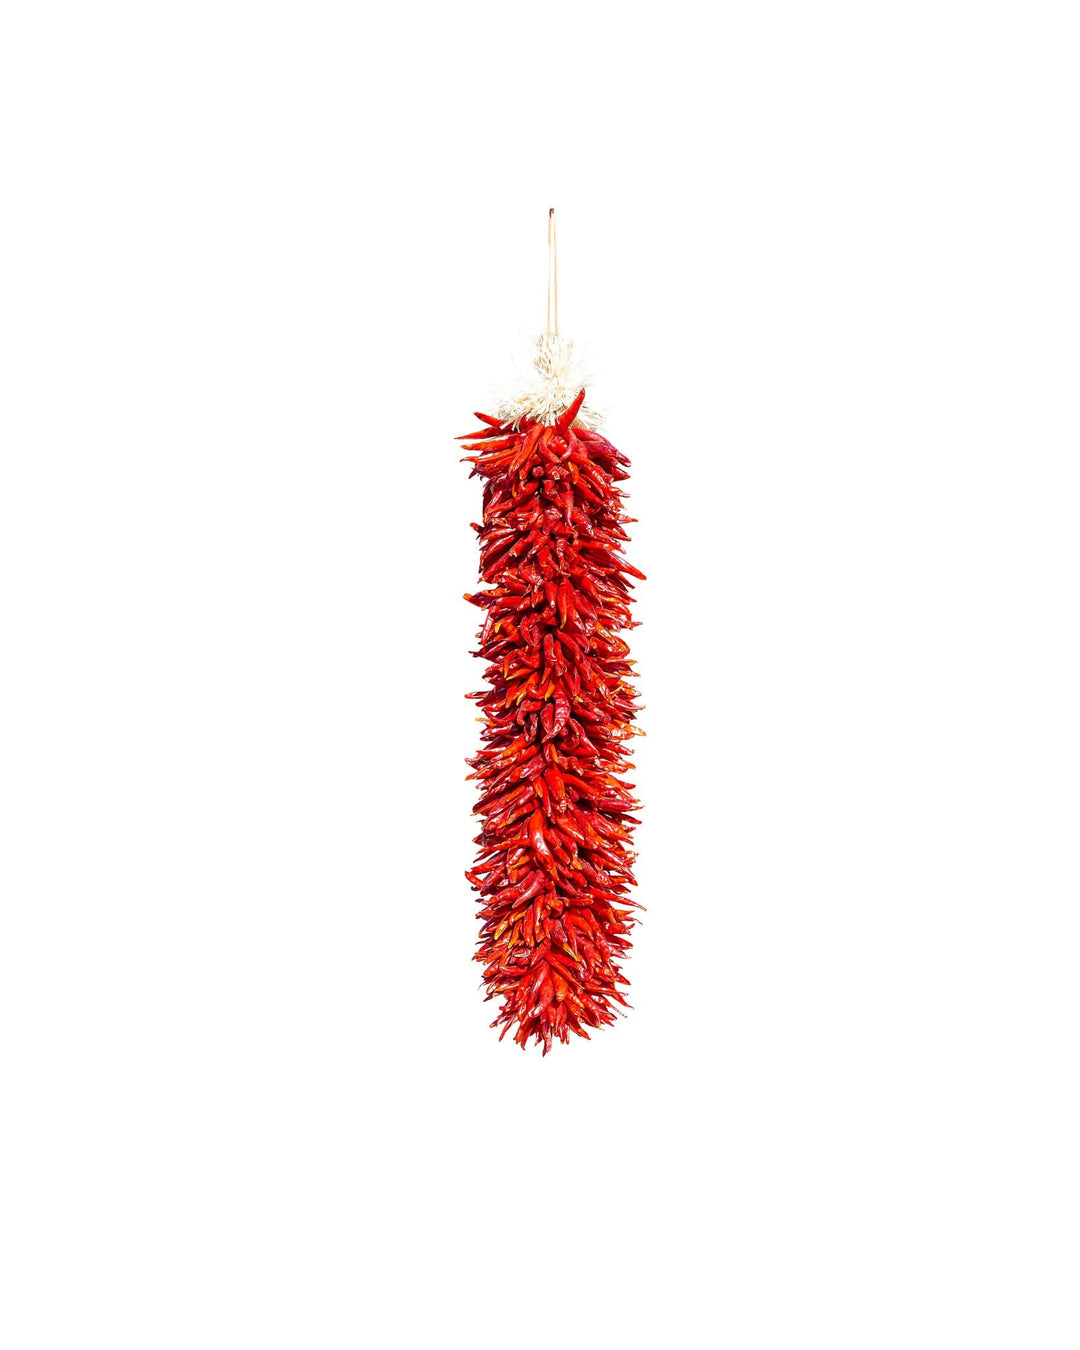 A vibrant red Chile Pequin Ristras hanging against a plain white background.